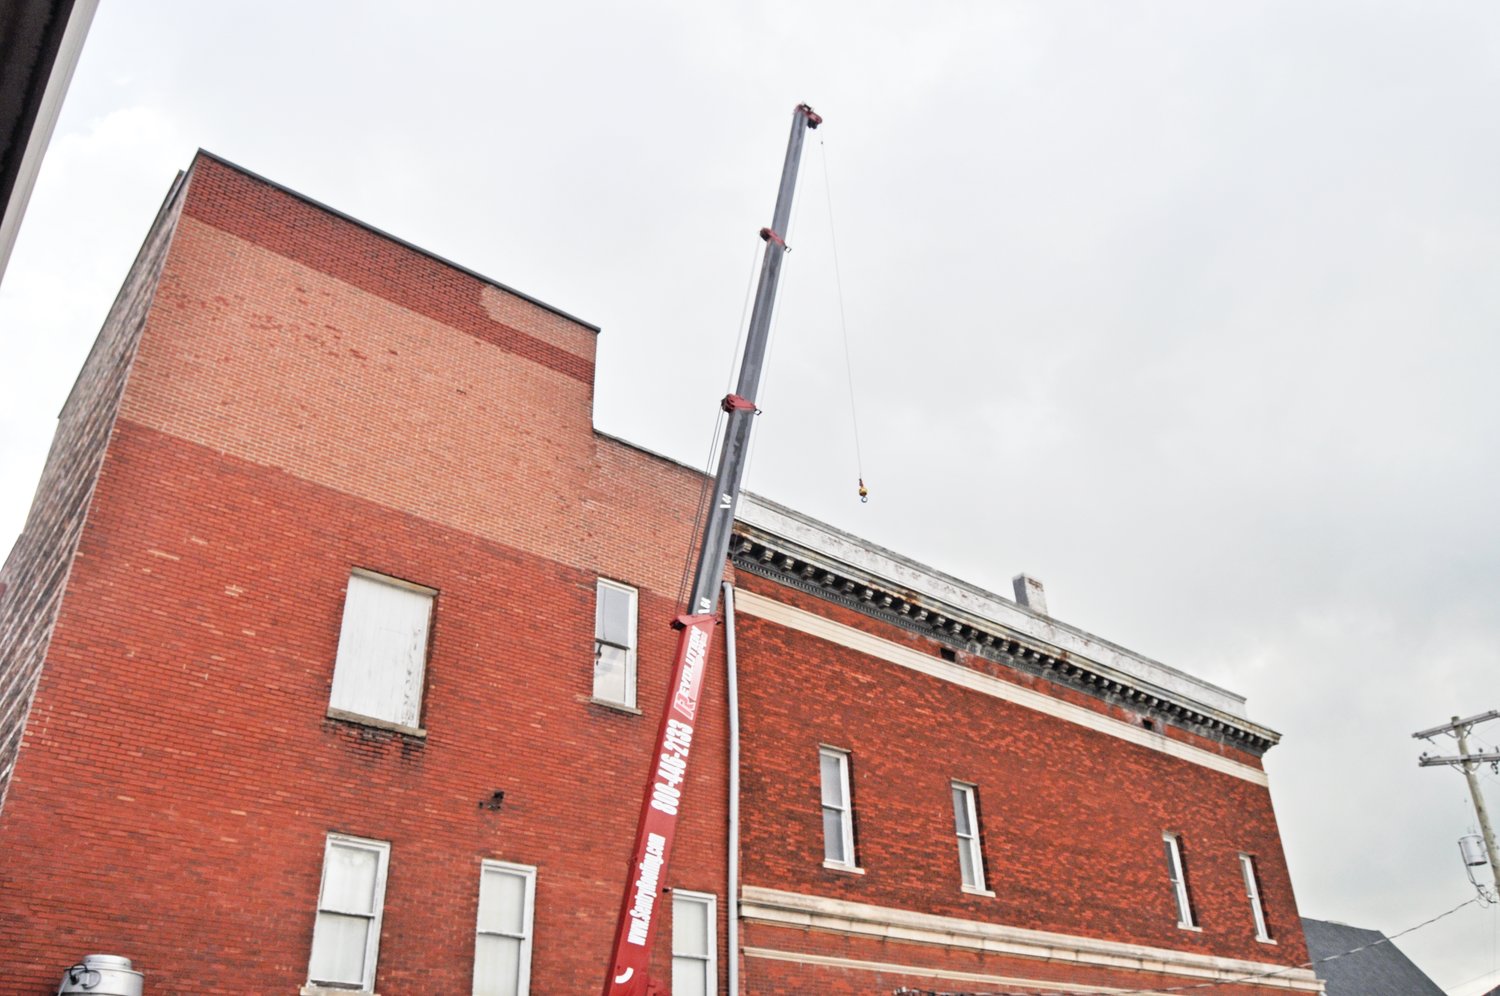 A crane reaches the top of the Masonic Cornerstone Grand Hall & Event Center on Monday. Crews from Sentry Roofing were in the process of starting long-planned work to replace the historic structure